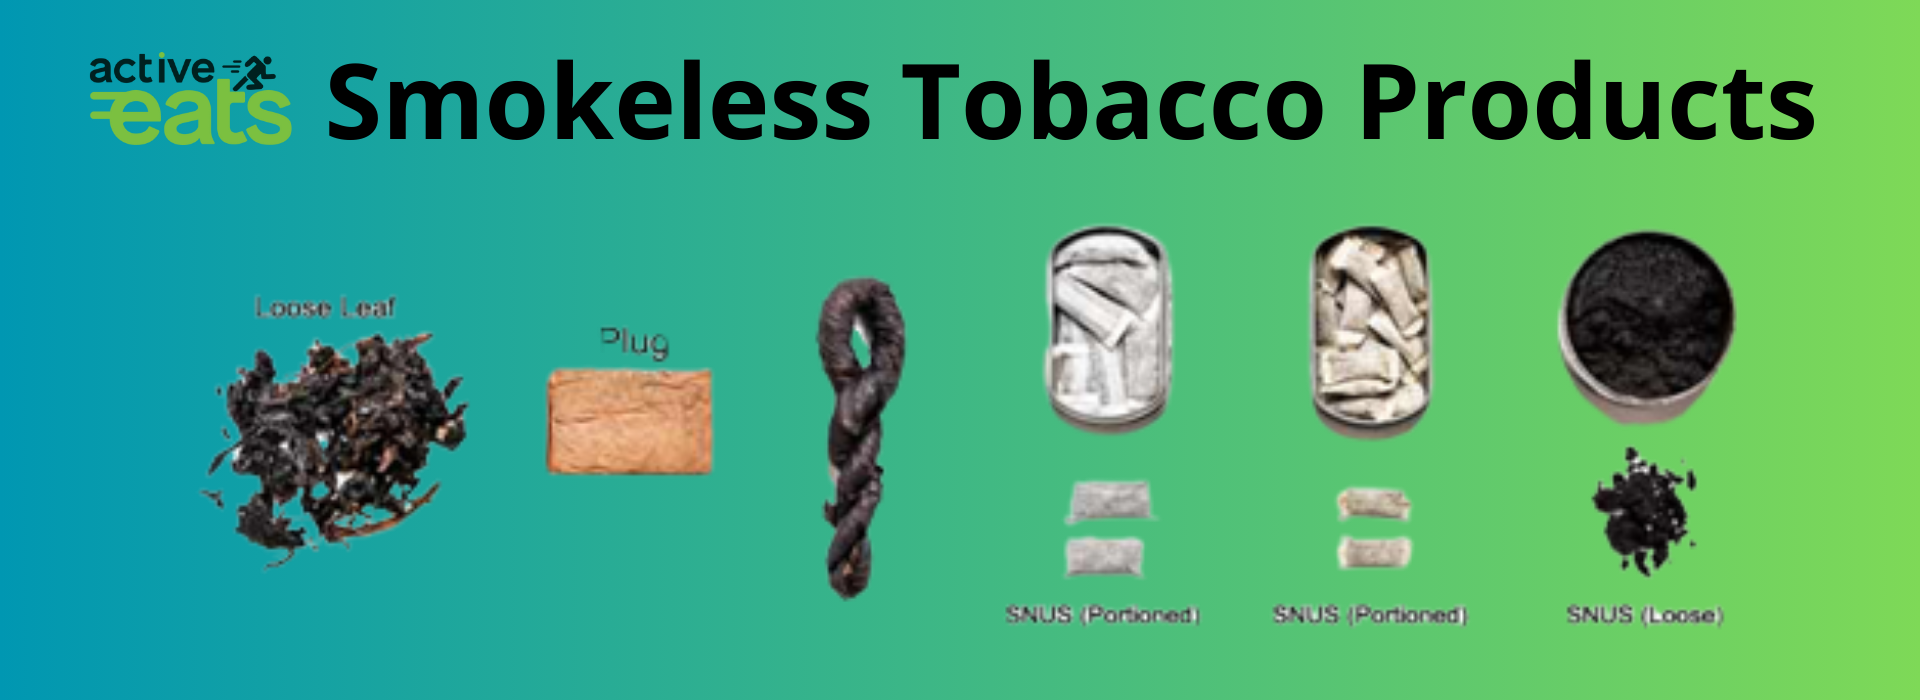 Image showing pictures of Smokeless Tobacco Products: Loose leaf, plug, snus.